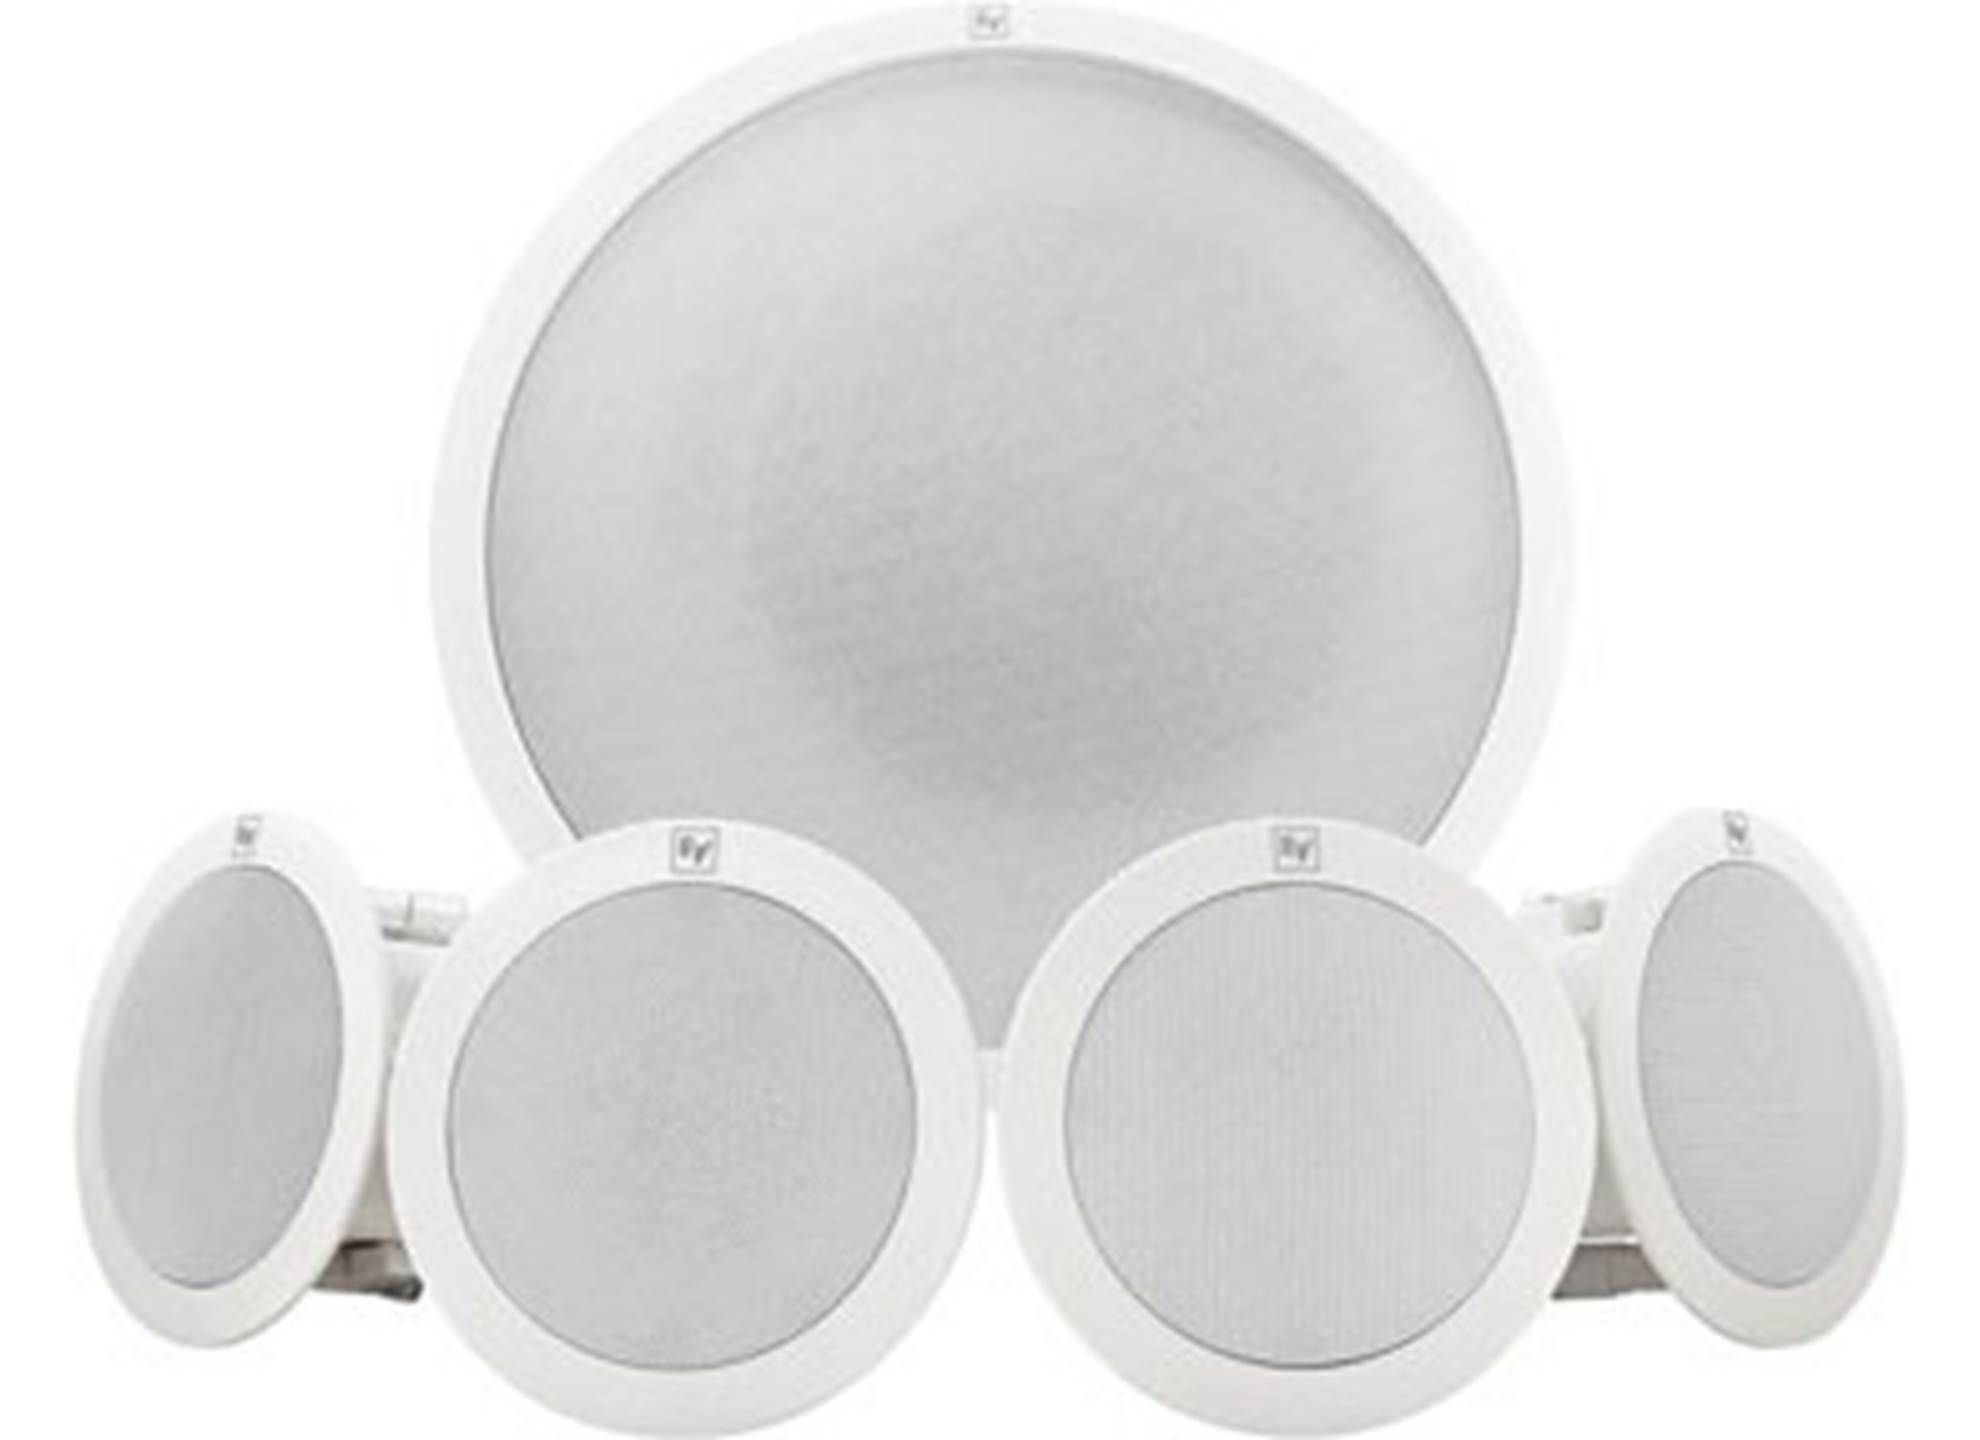 EVID C44 Compact Ceiling Sound System